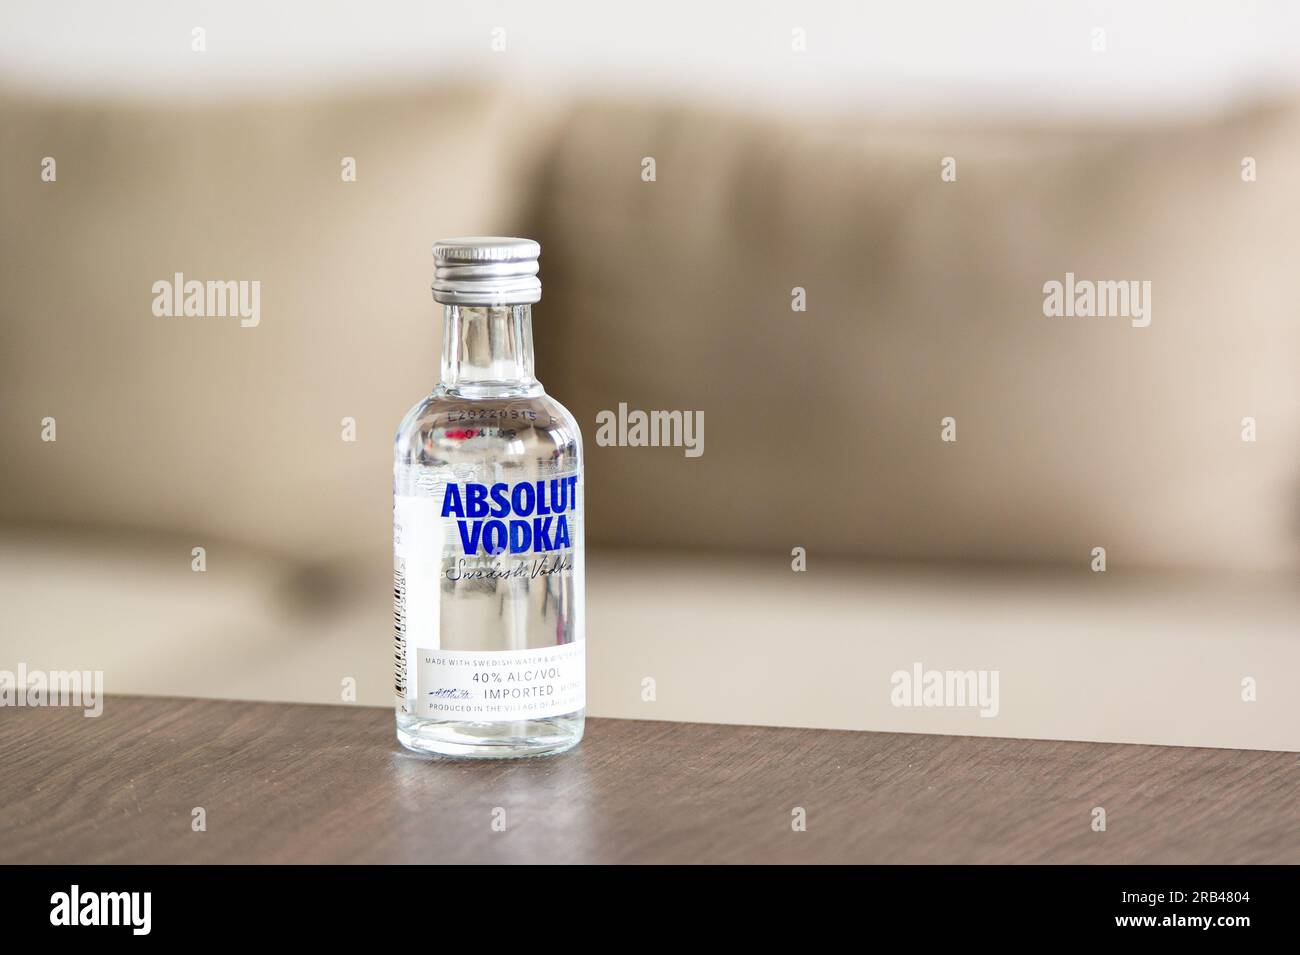 OSTRAVA, CZECH REPUBLIC - JUNE 21, 2023: Small bottle of Absolut Vodka spirit made from Swedish water and alcohol Stock Photo